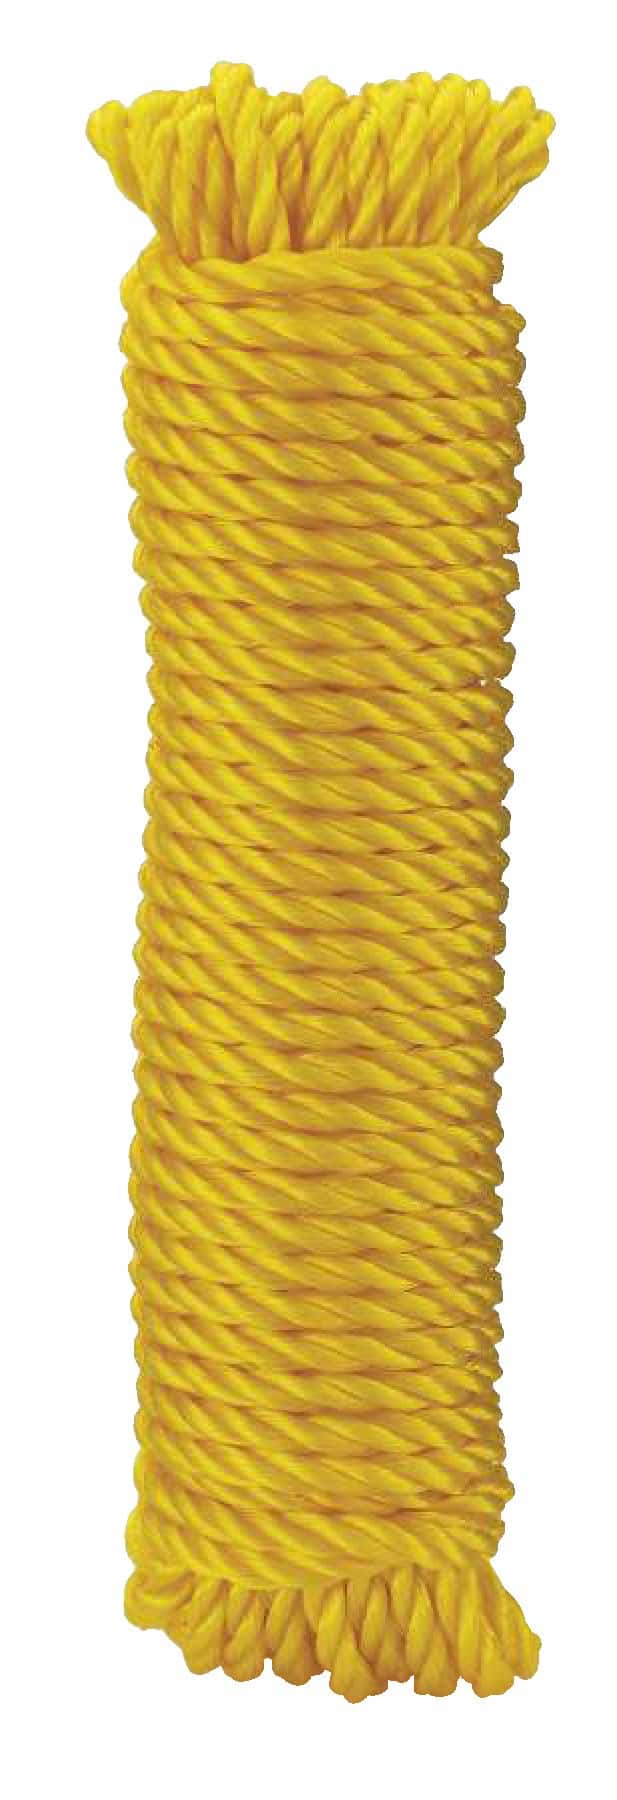 Polypro Utility Rope - Multiple Size/Color Options